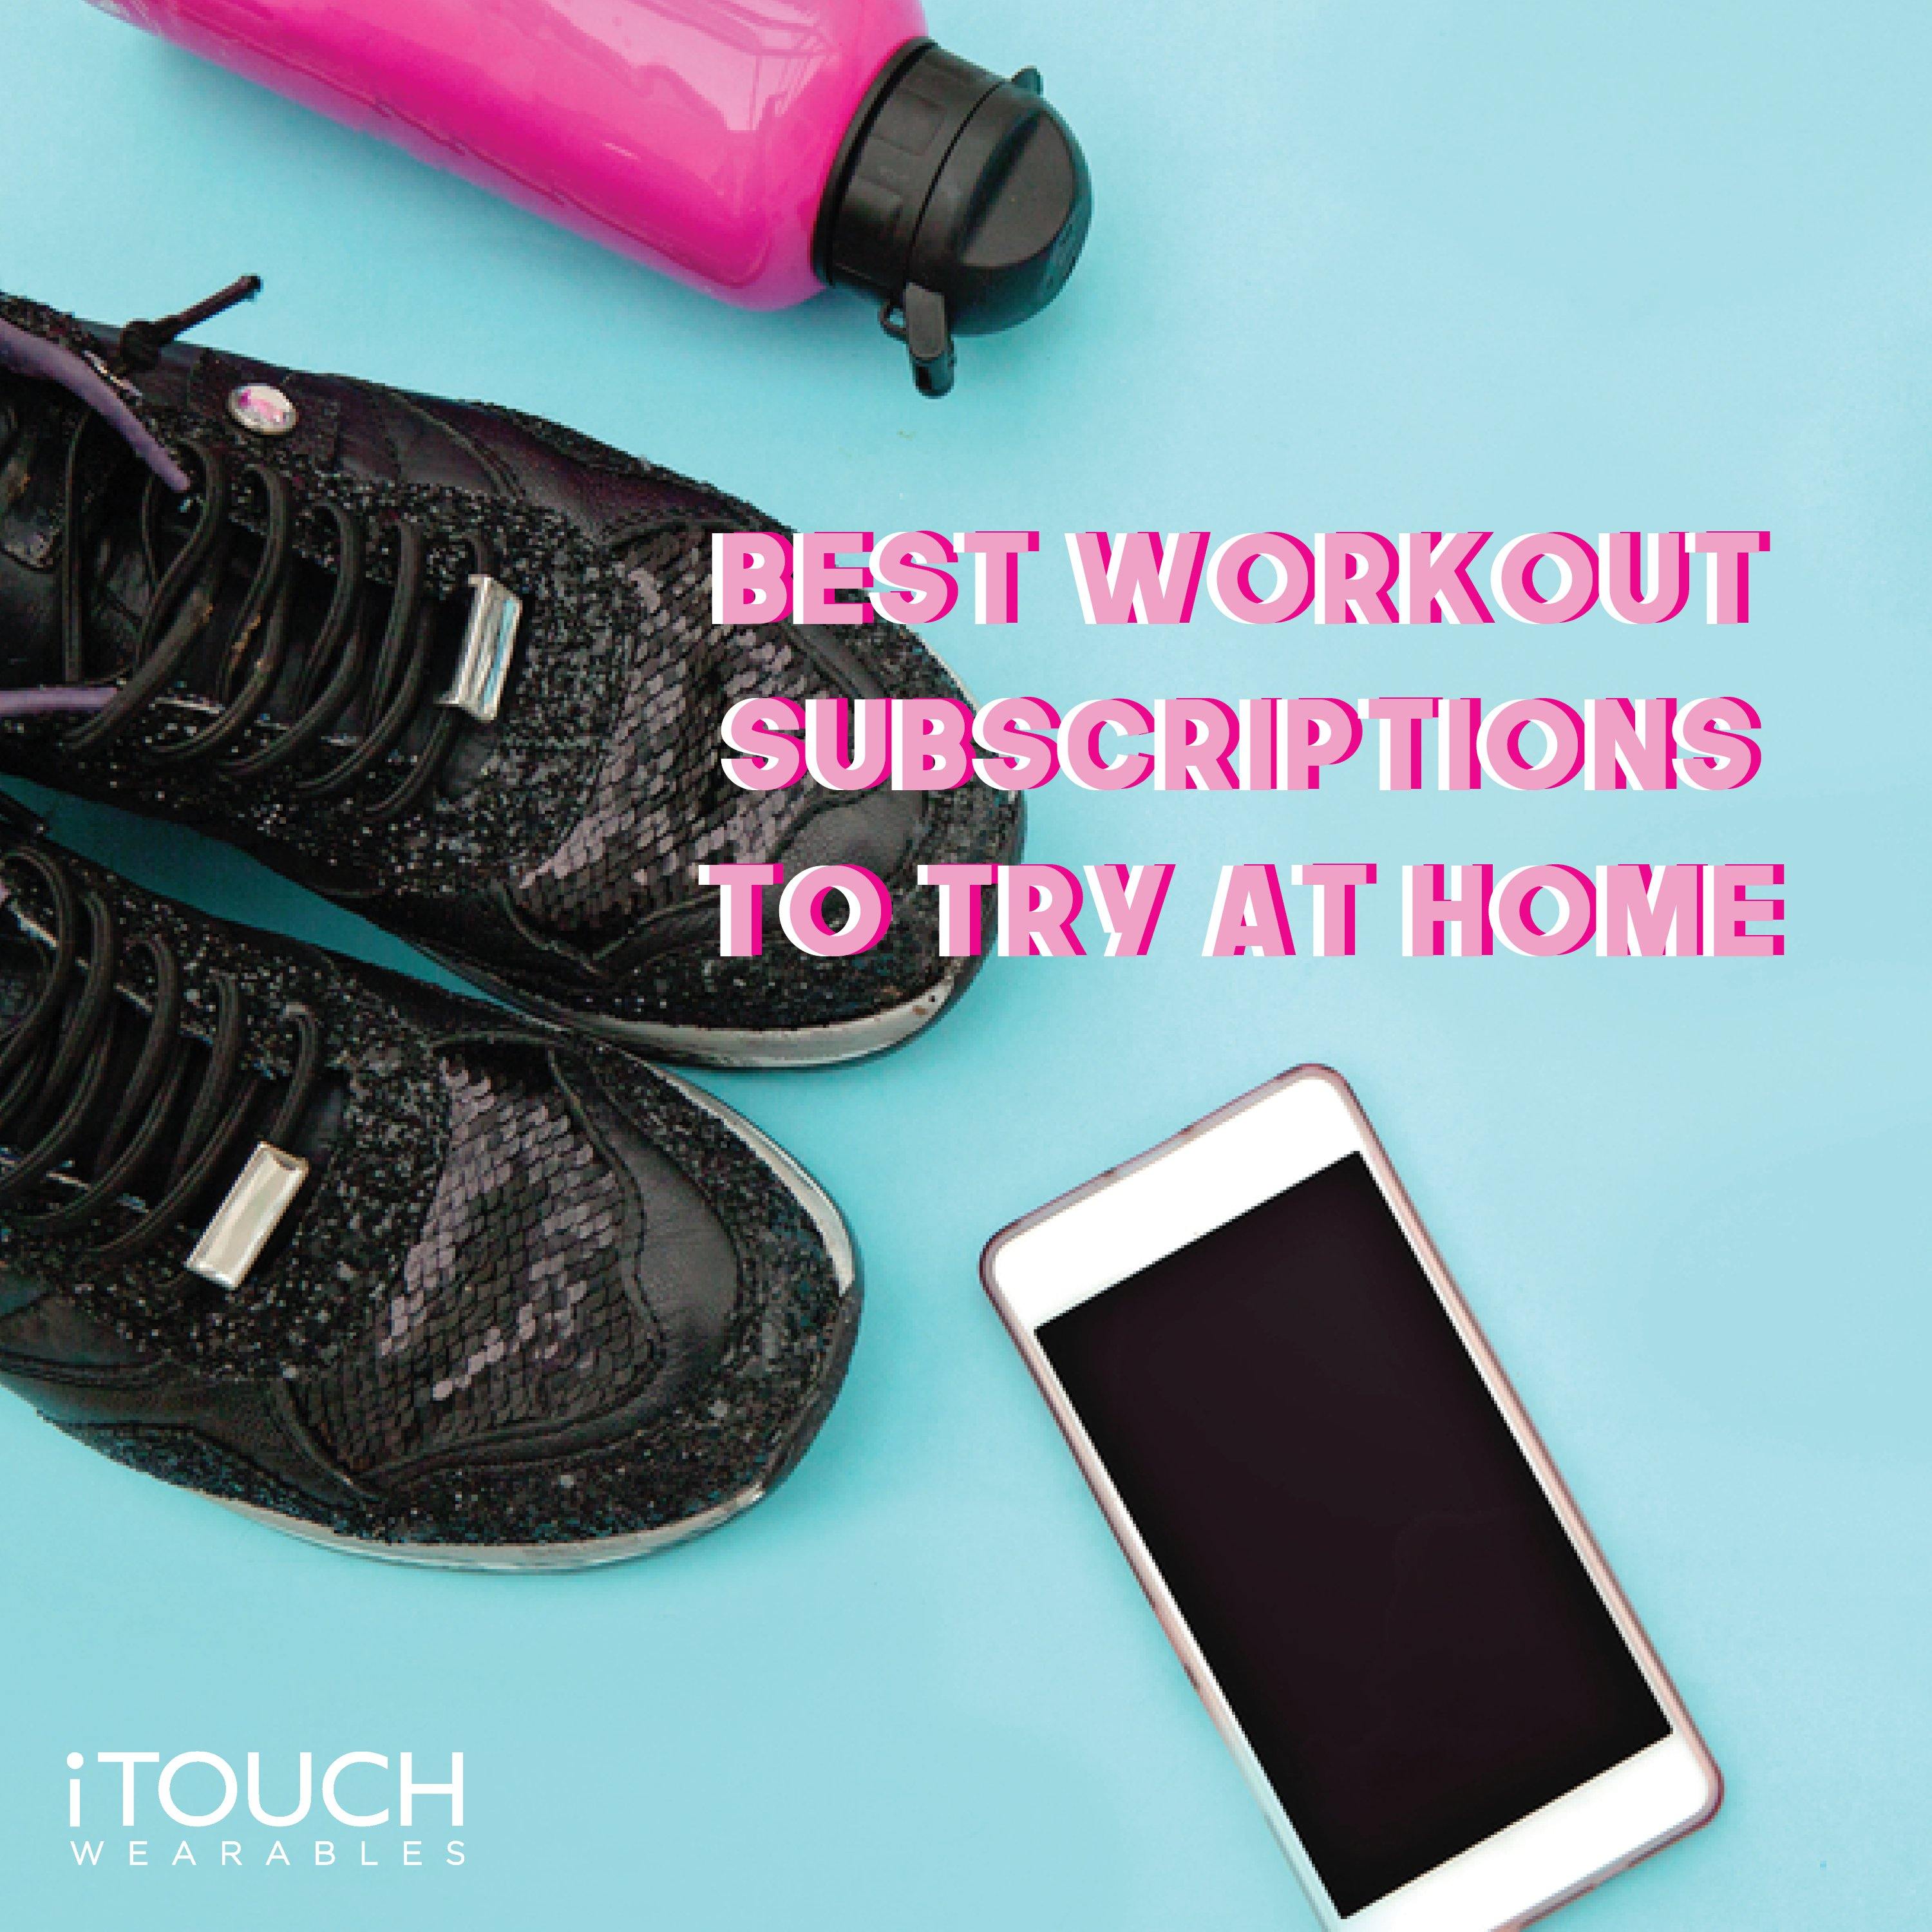 Best Workout Subscriptions To Try At Home - iTOUCH Wearables